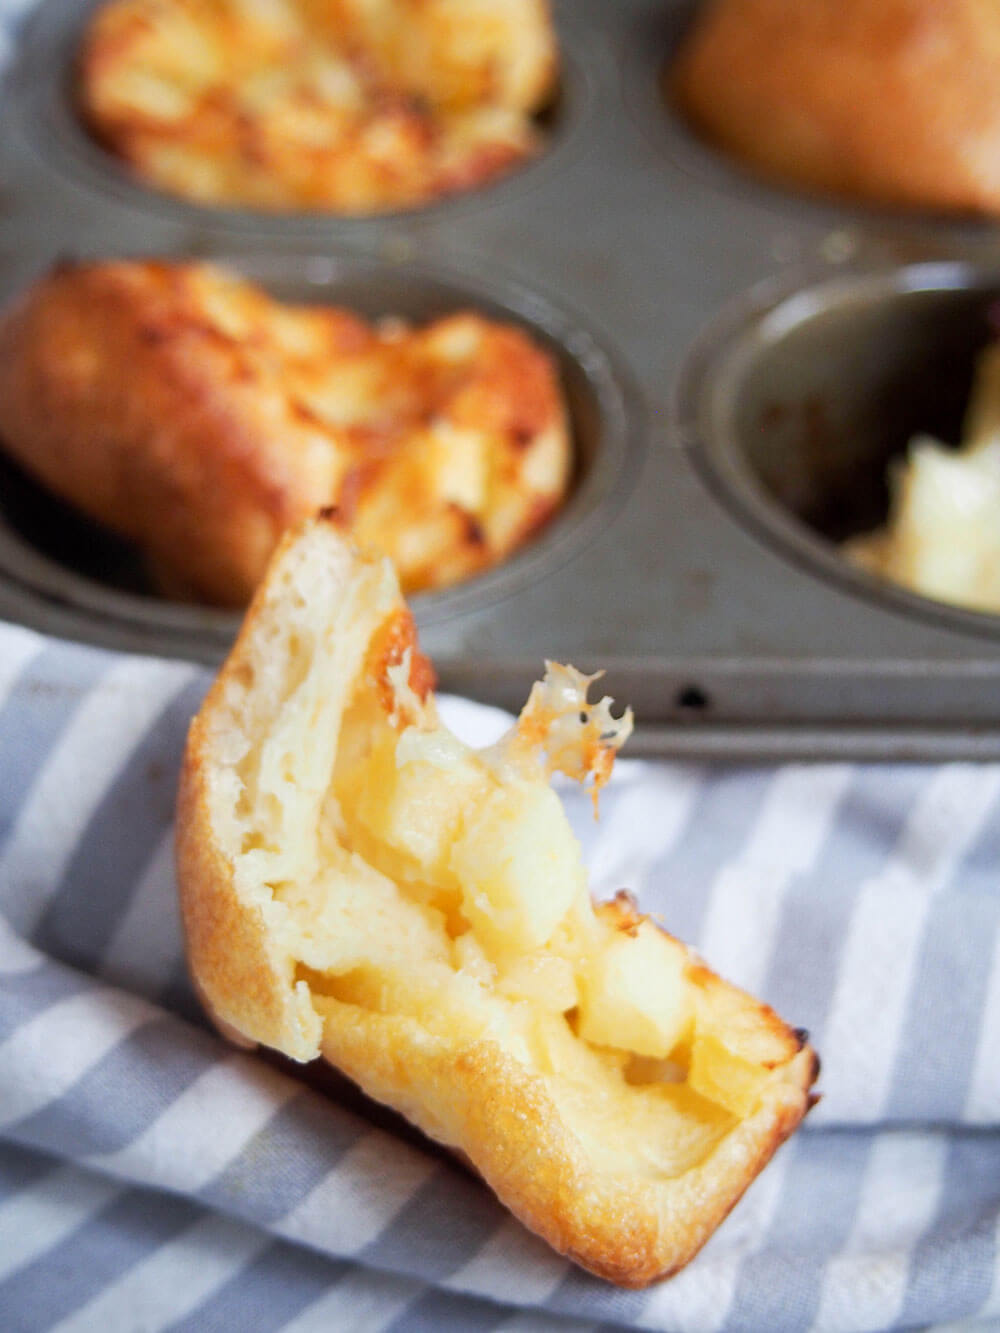 torn apple and cheddar cheese Yorkshire pudding showing inside in front of pan